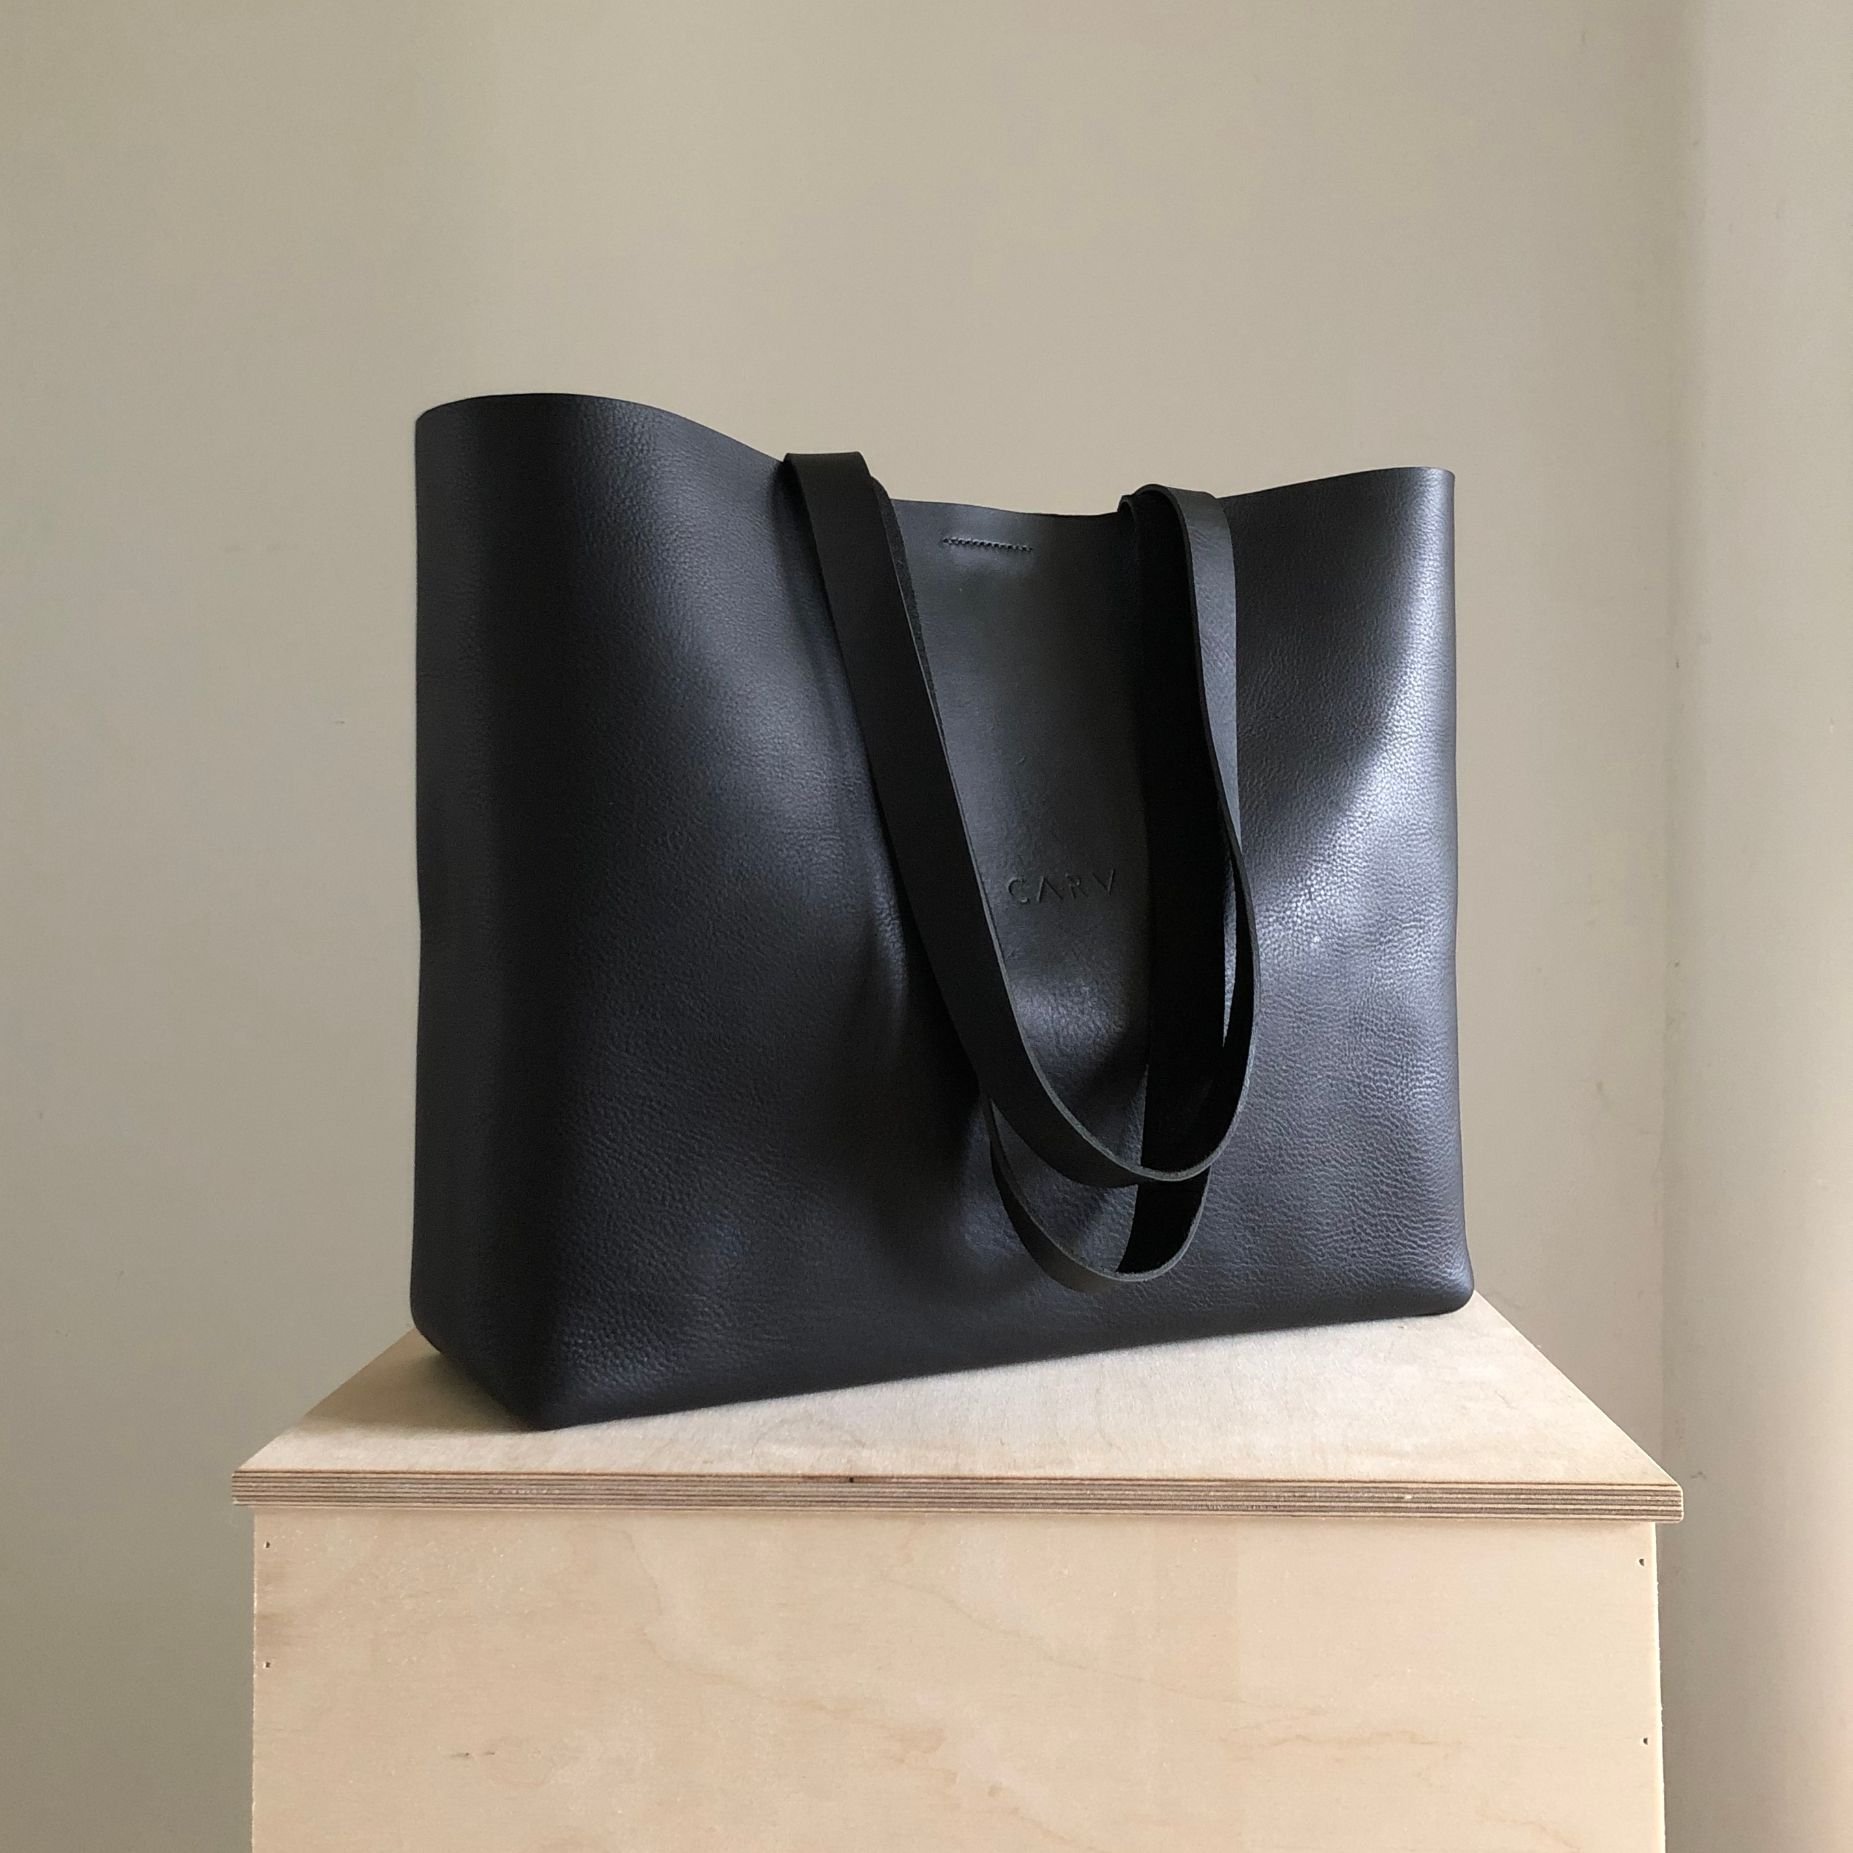 Online Shop for Leather Bags & Accessories. Made in the UK — CARV